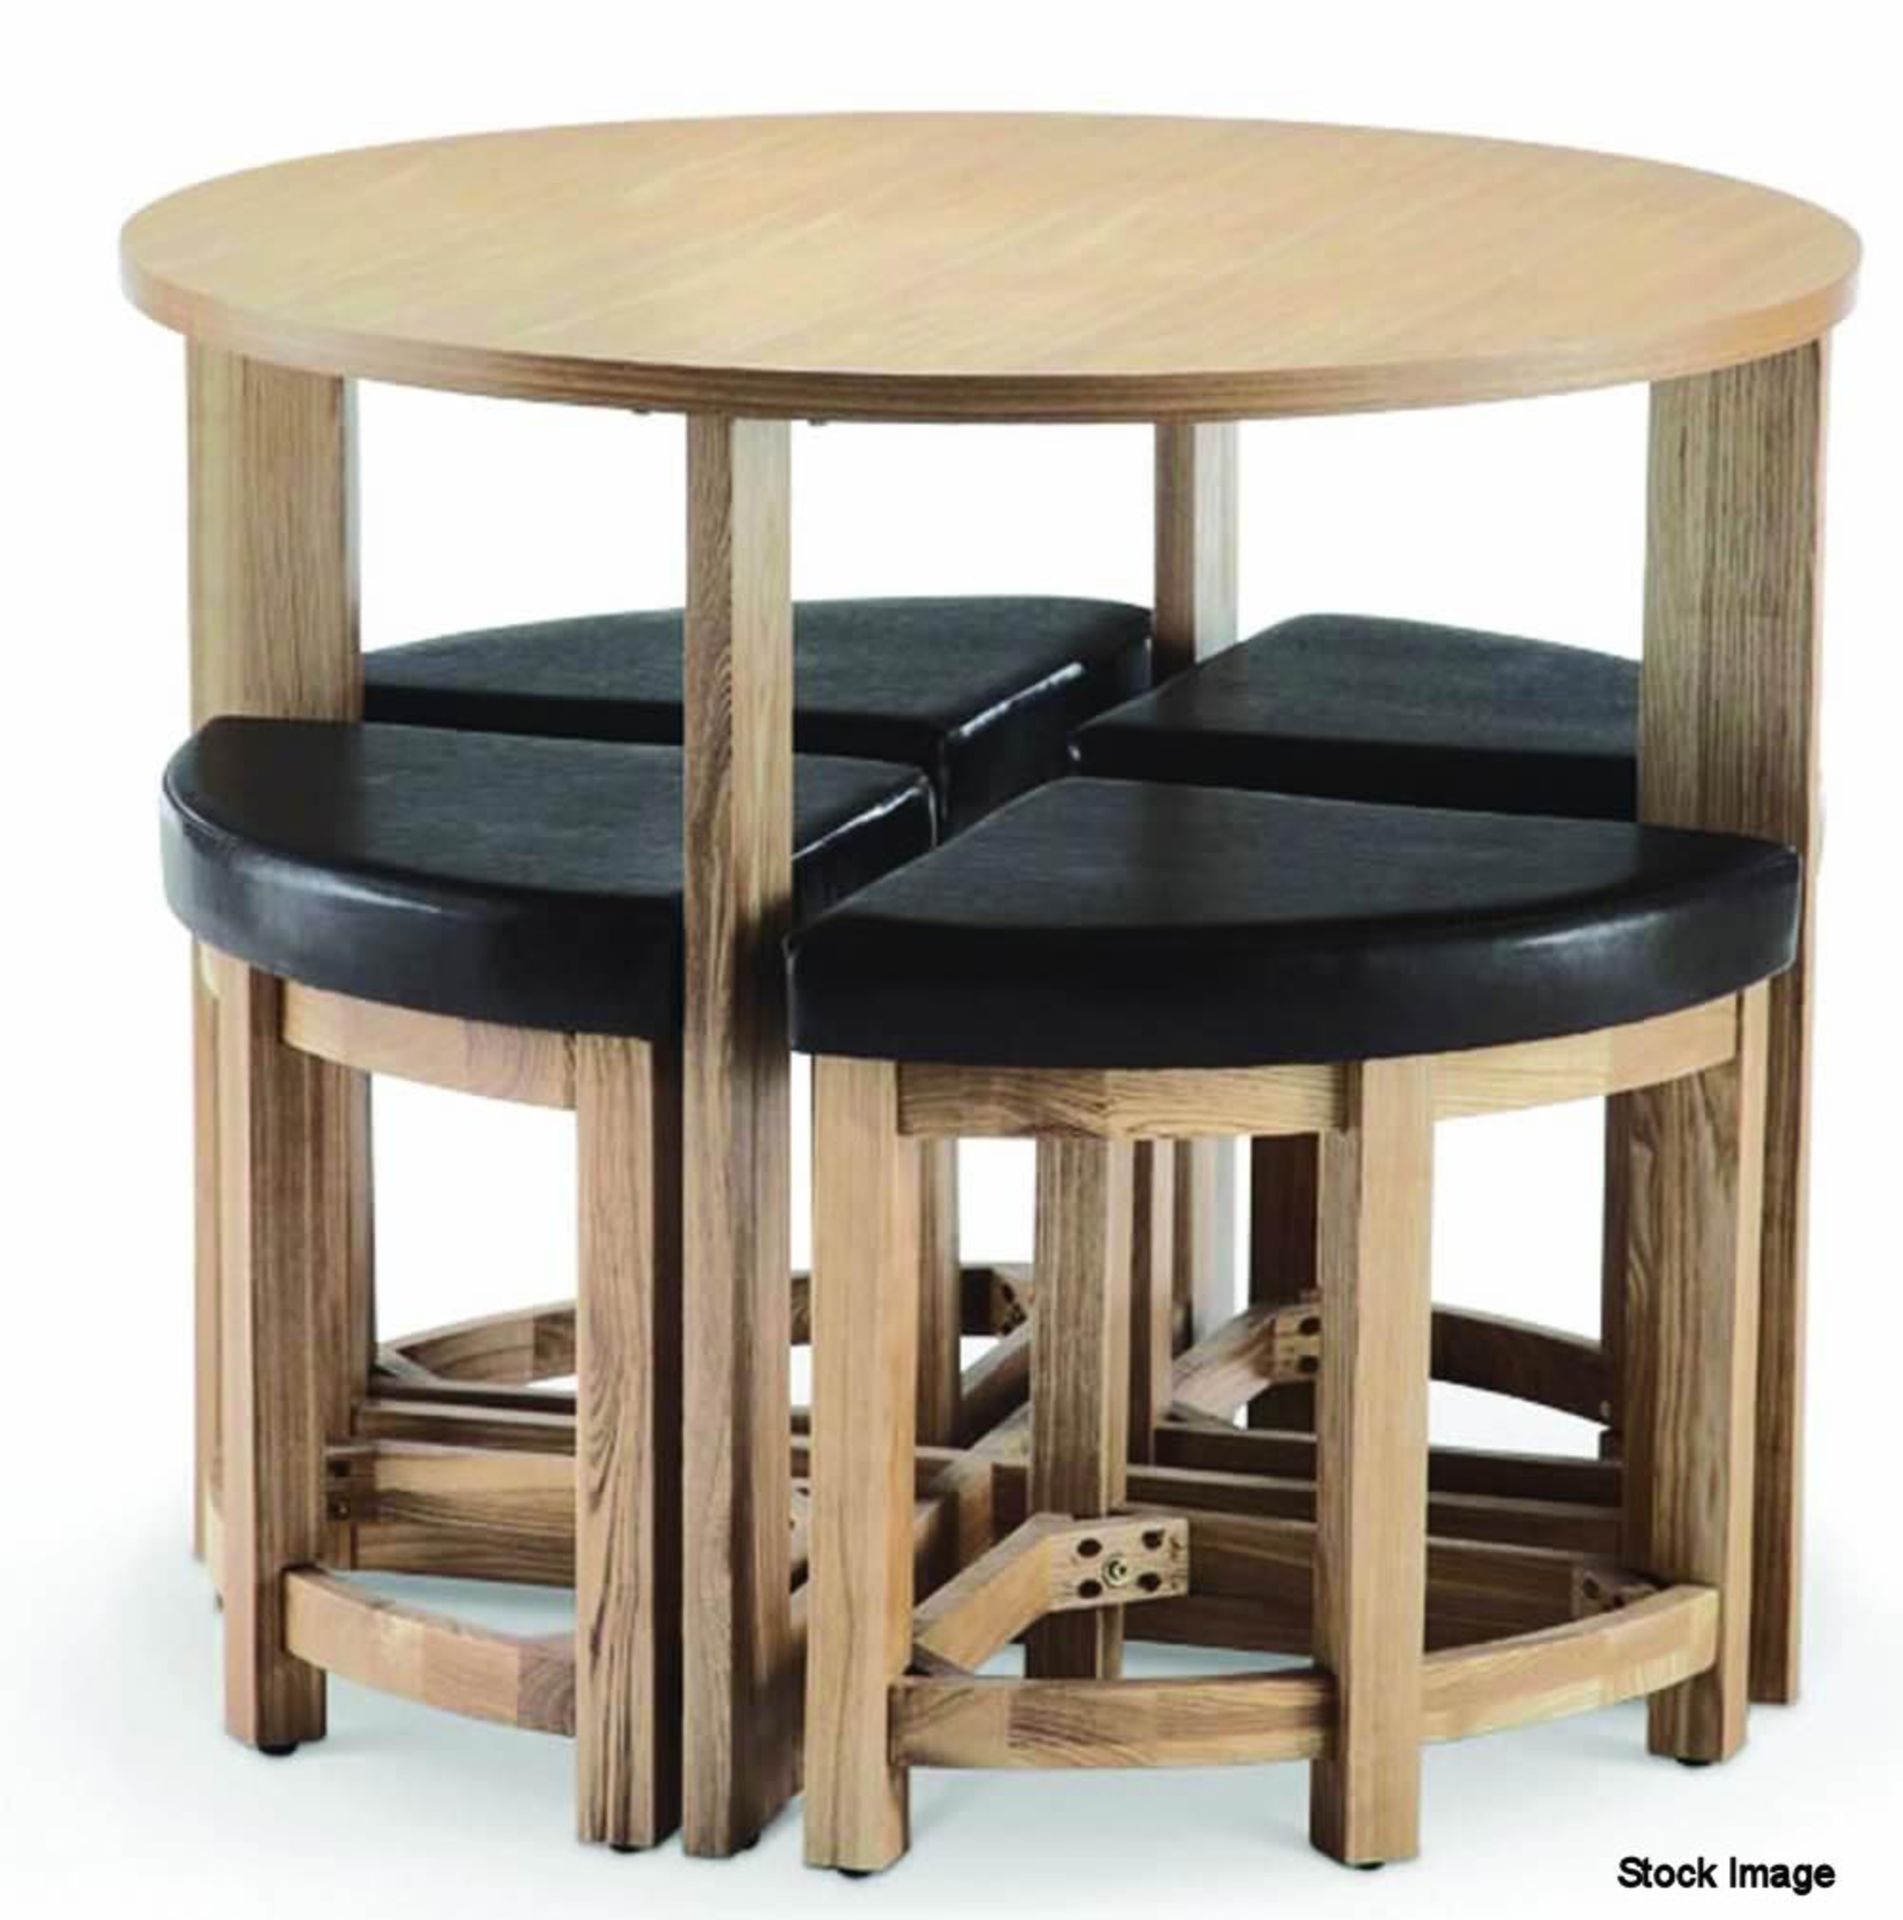 Oak Ash Veneer Stowaway Dining Table with 4 Brown Faux Leather Padded Stools - CL185 - Ref:OakSW - L